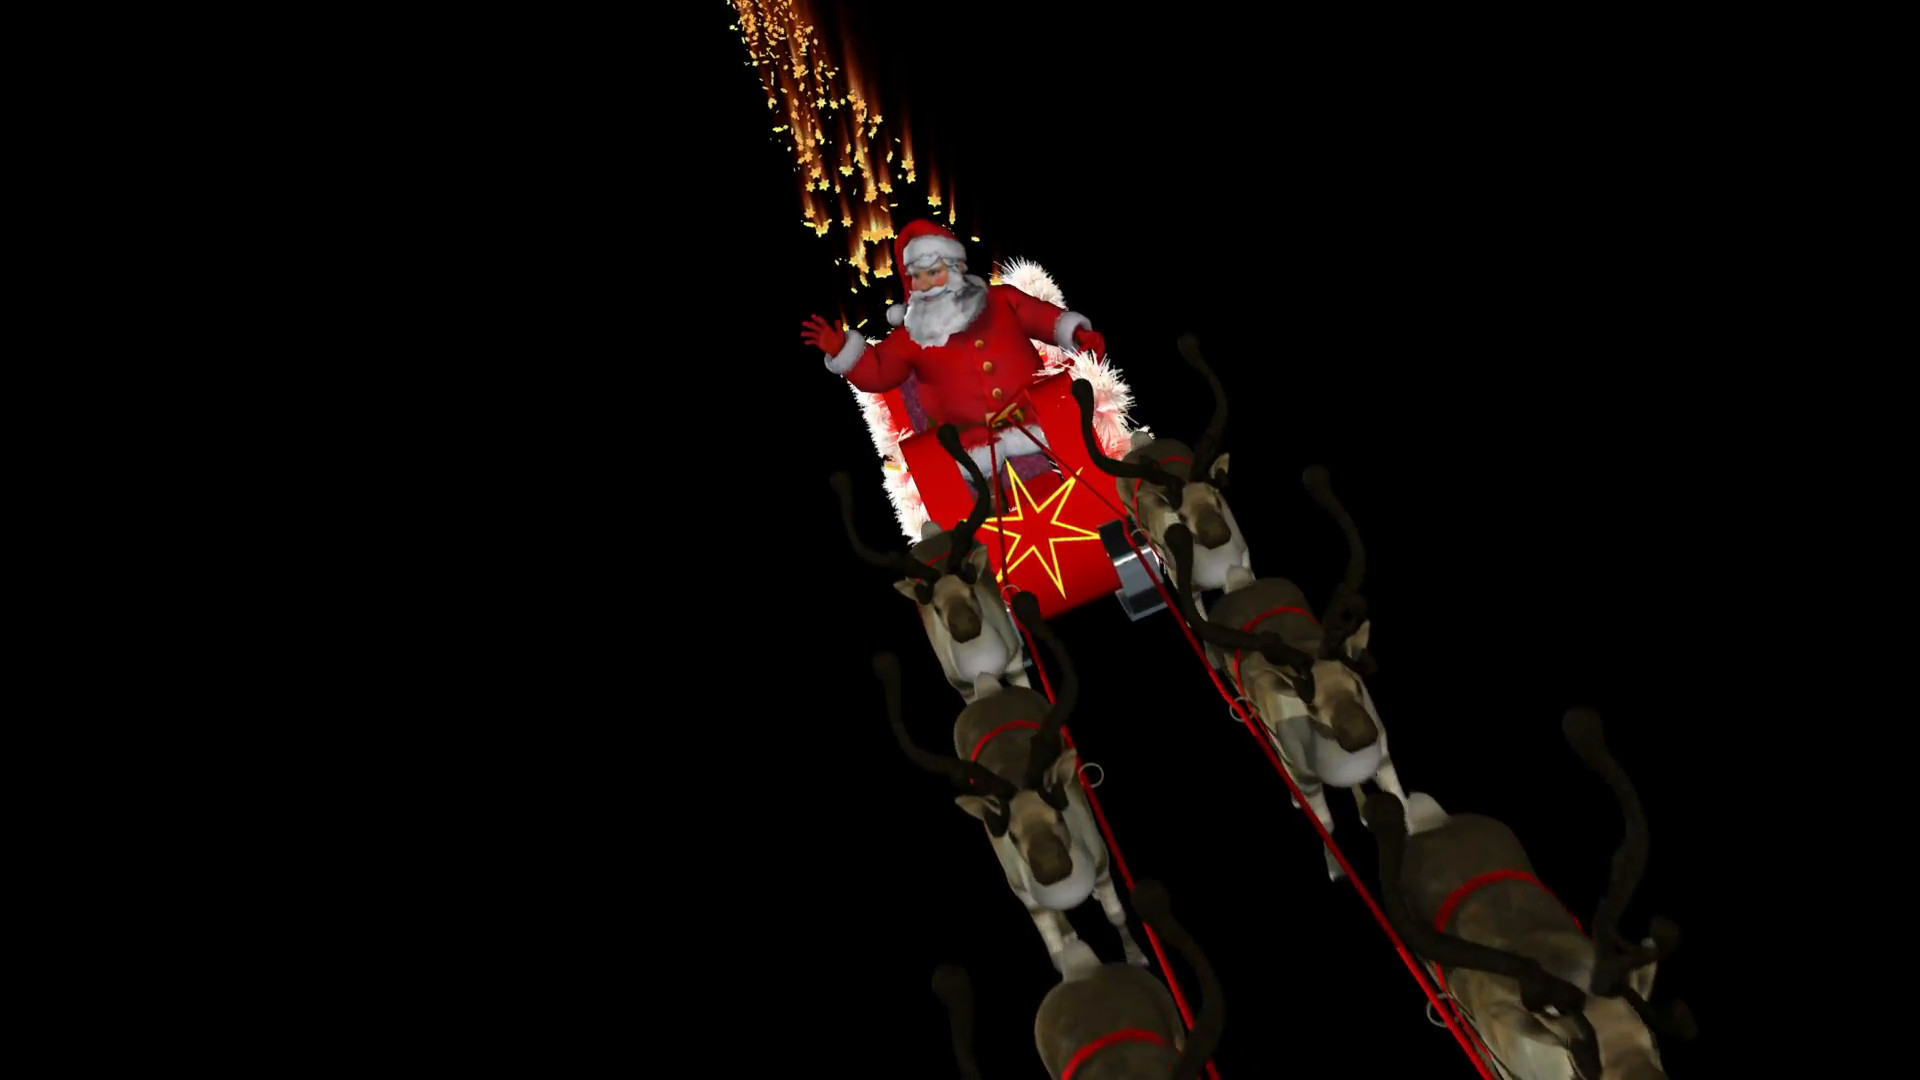 1920x1080 Christmas clip of Santa Claus and Sleigh flying into camera overhead shot  Motion Background - Storyblocks Video